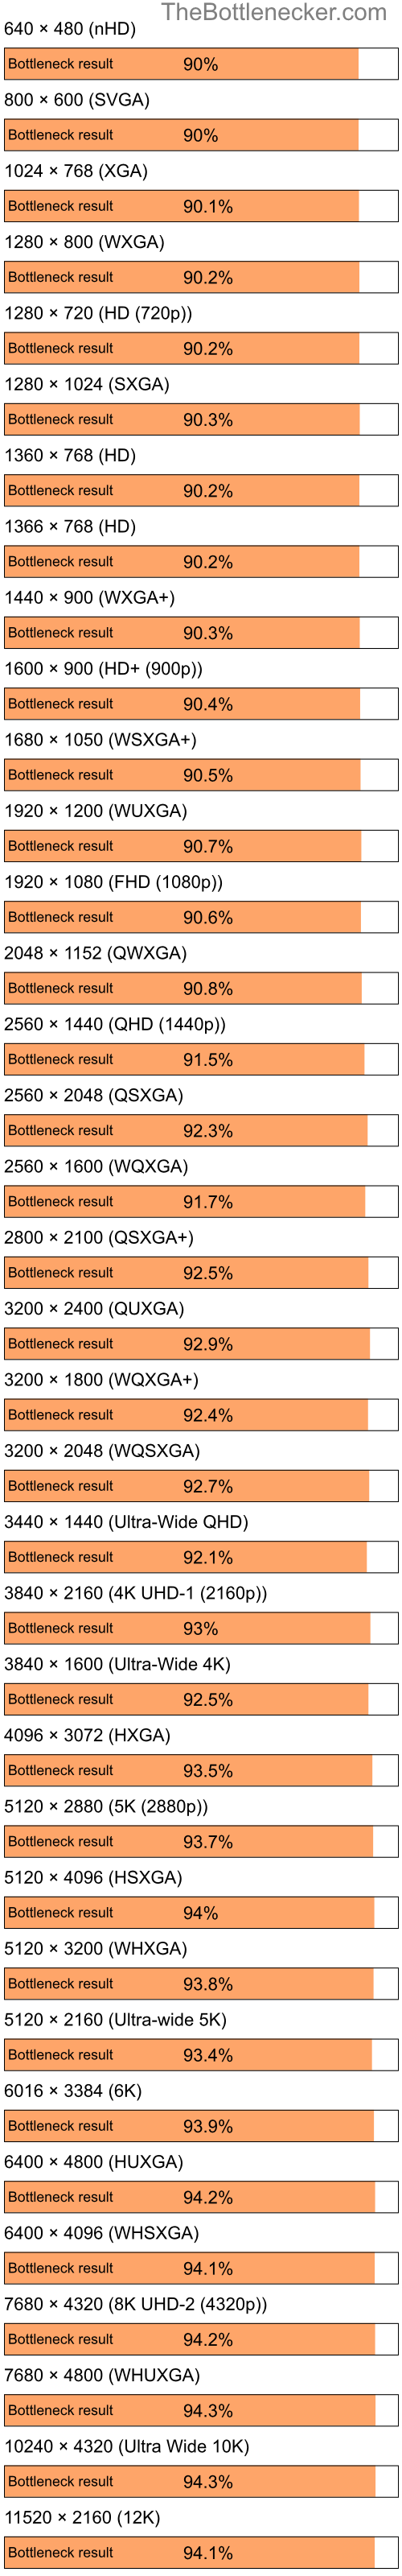 Bottleneck results by resolution for Intel Celeron M 420 and NVIDIA GeForce FX Go 5200 in Graphic Card Intense Tasks